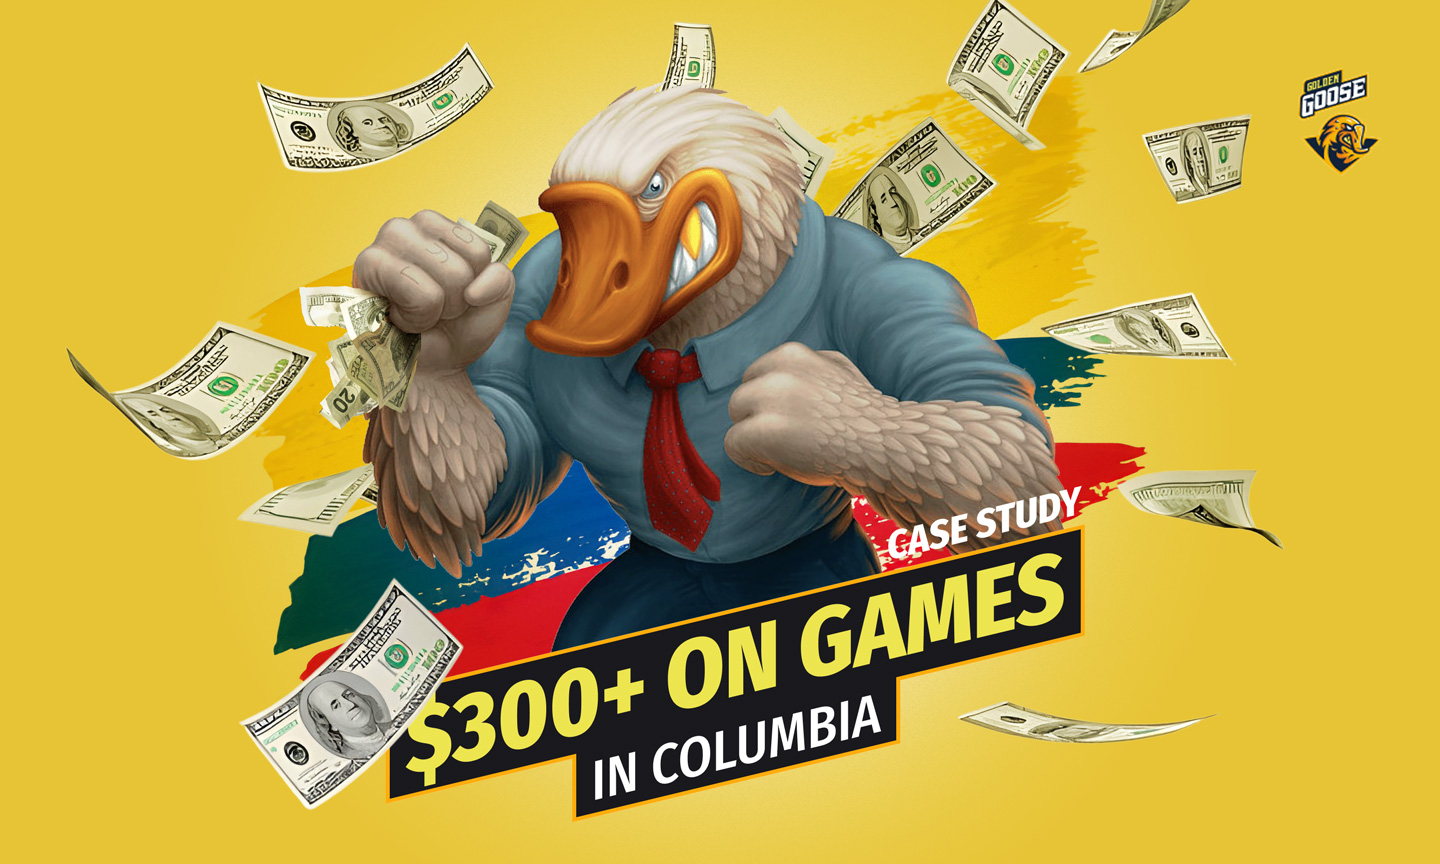 Back to Colombian Gamers: $300+ Campaign